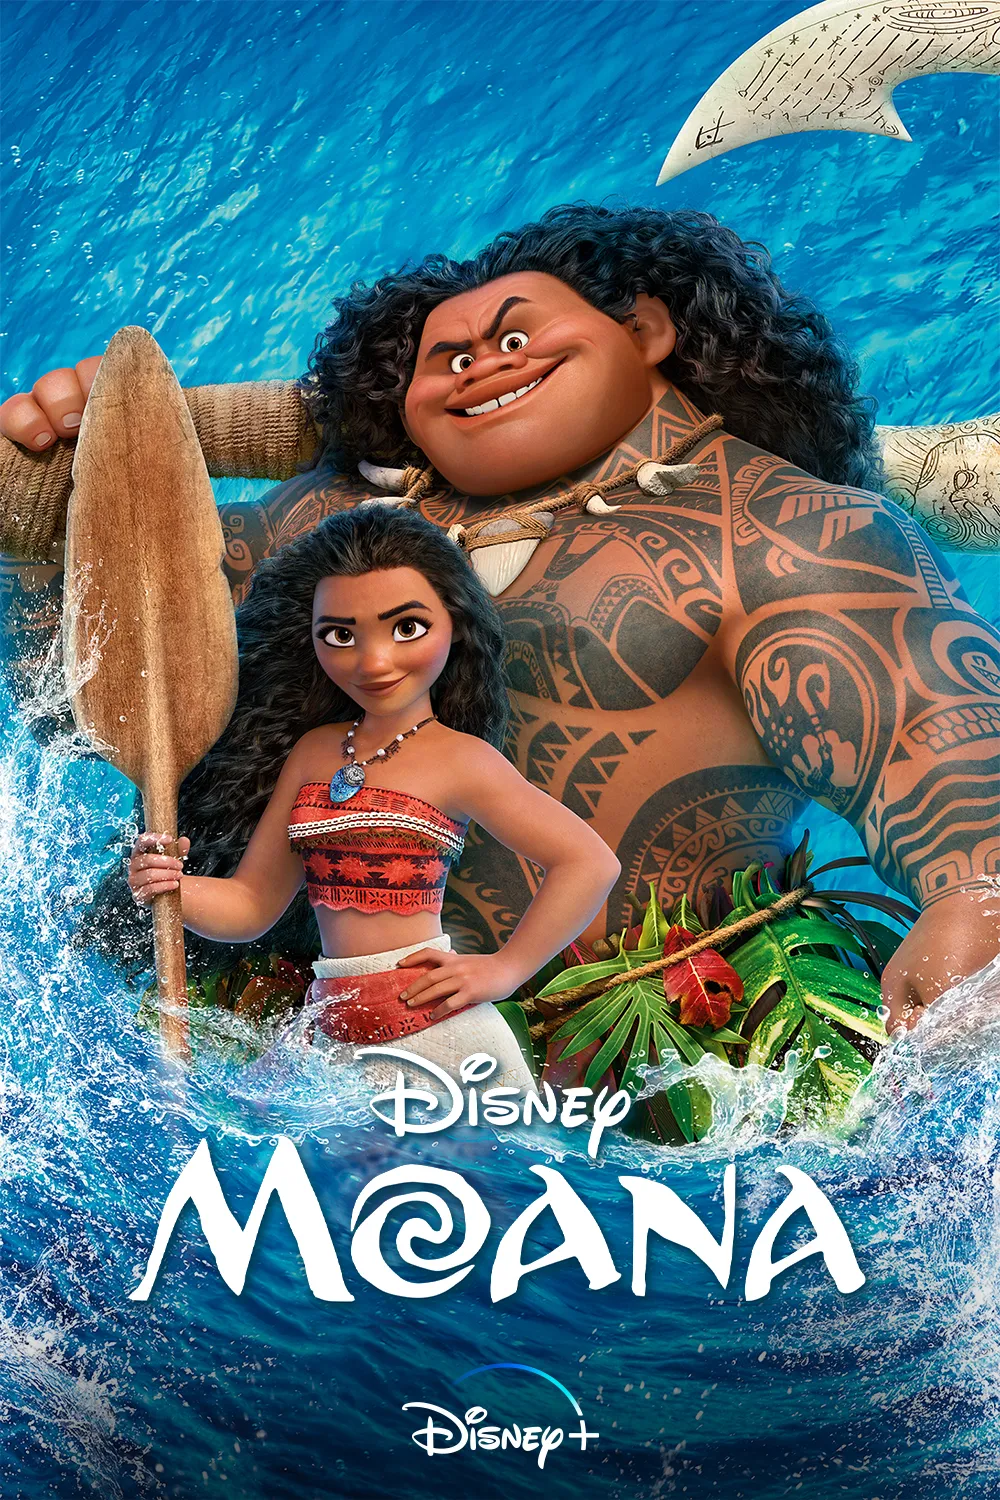 Moana on Disney+ movie poster: A brave Polynesian princess sets sail to save her people from a terrible curse, proving that even the smallest person can make a big difference